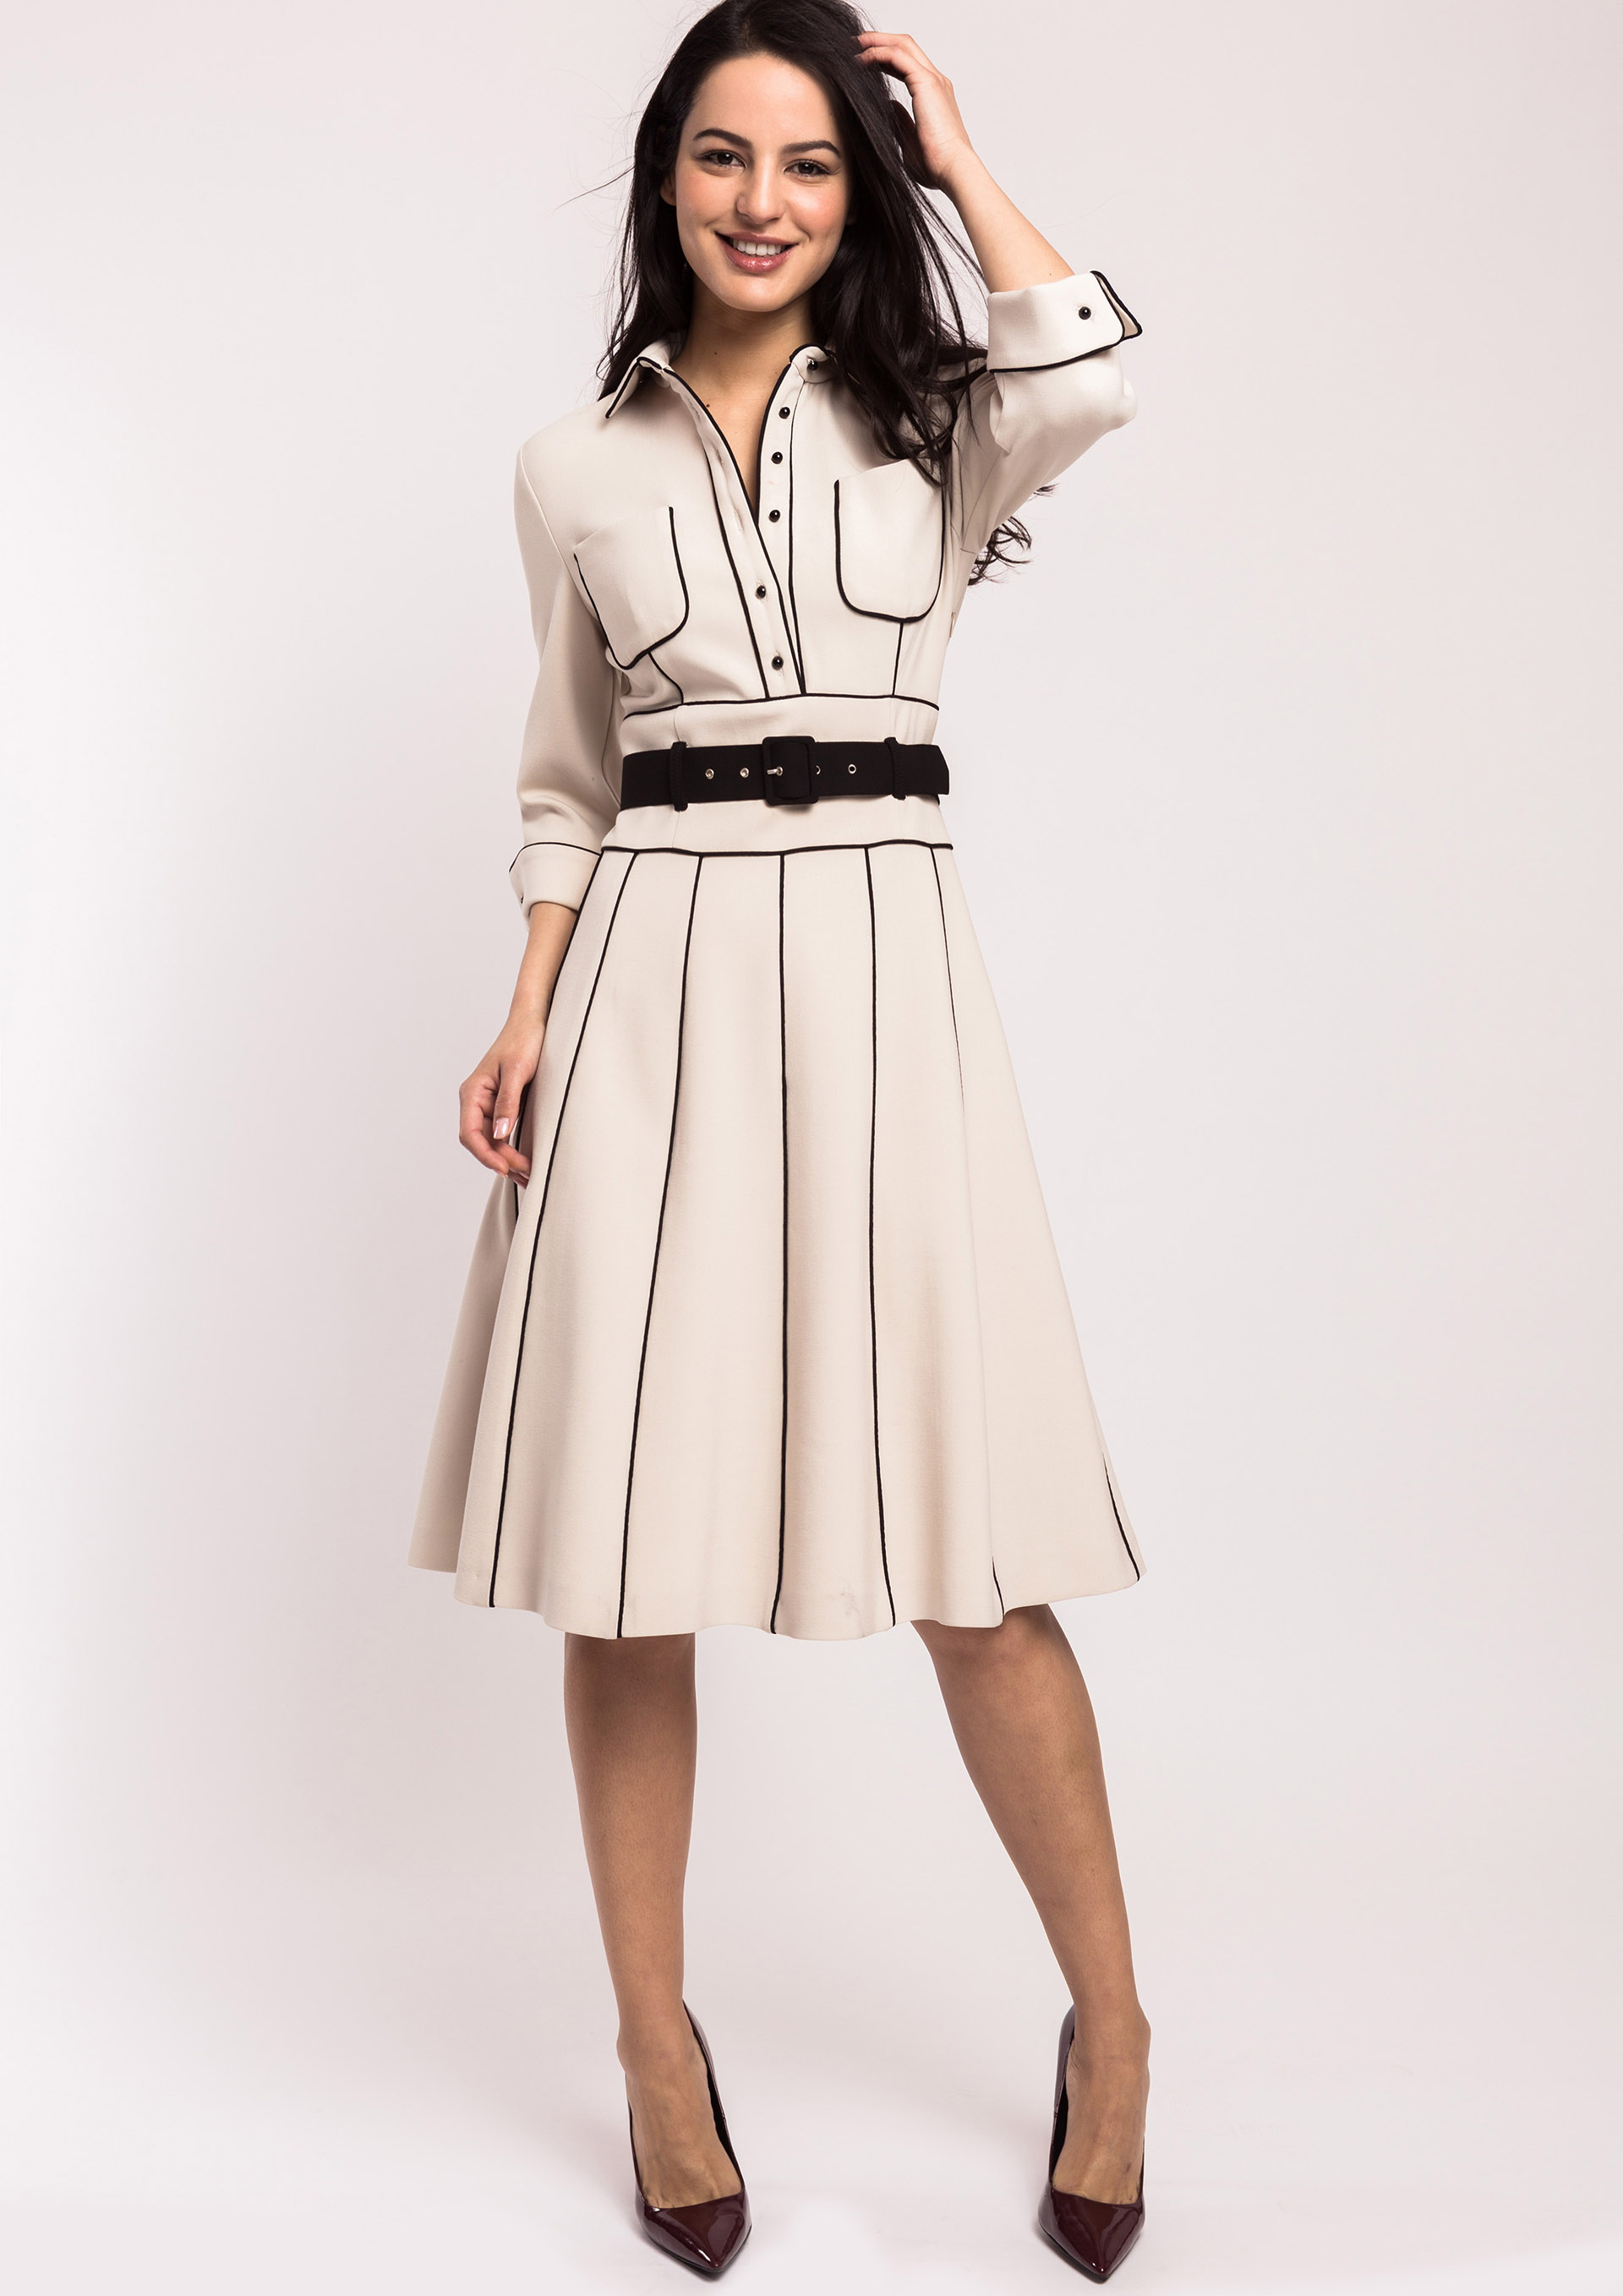 Beige A-line dress with contrast piping